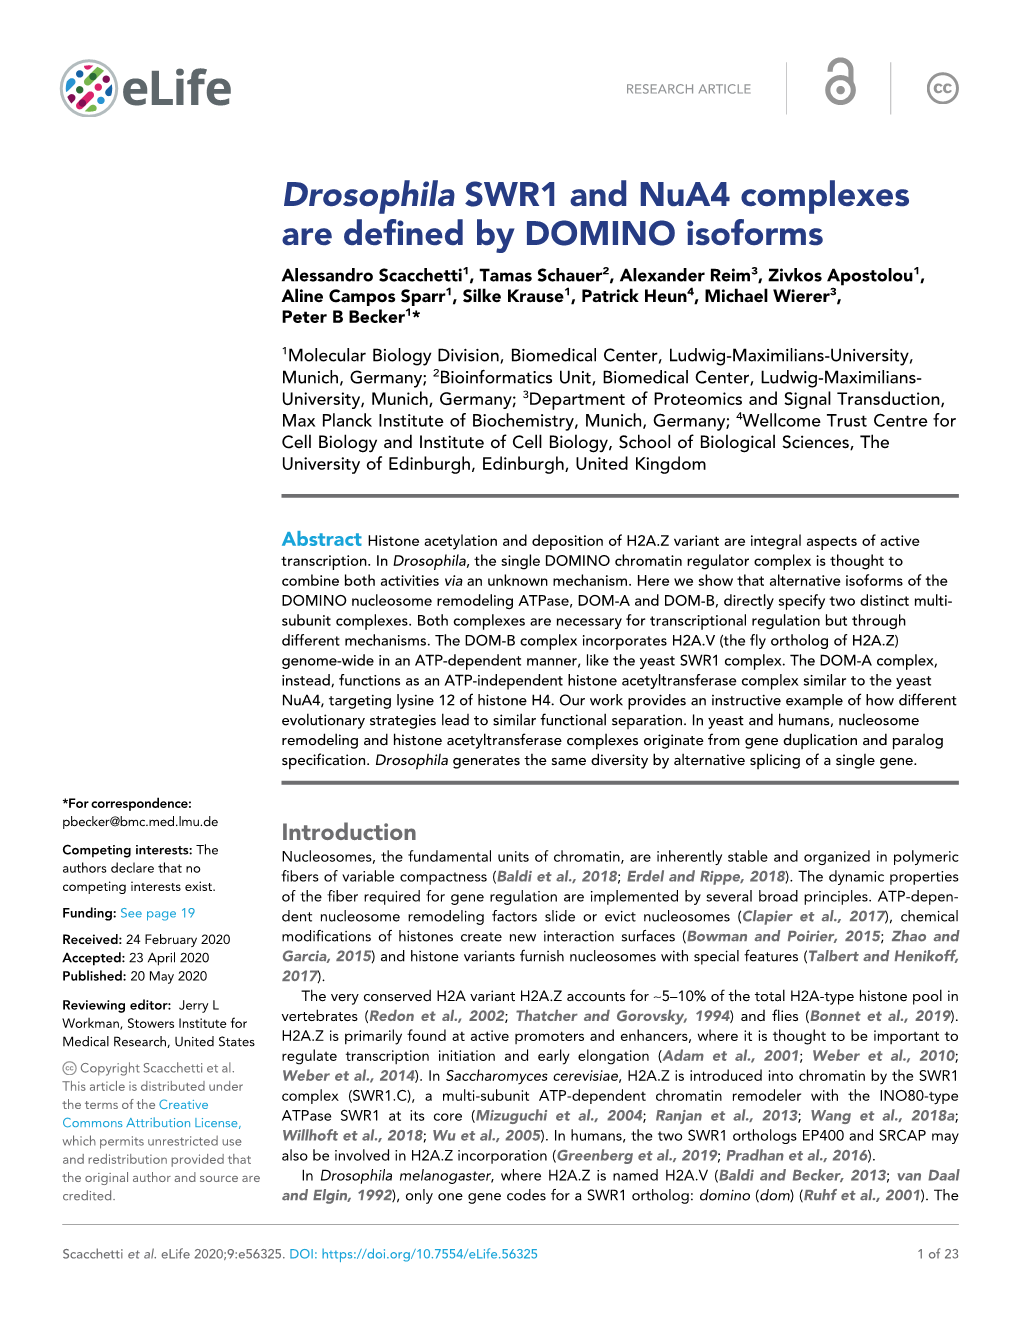 Drosophila SWR1 and Nua4 Complexes Are Defined by DOMINO